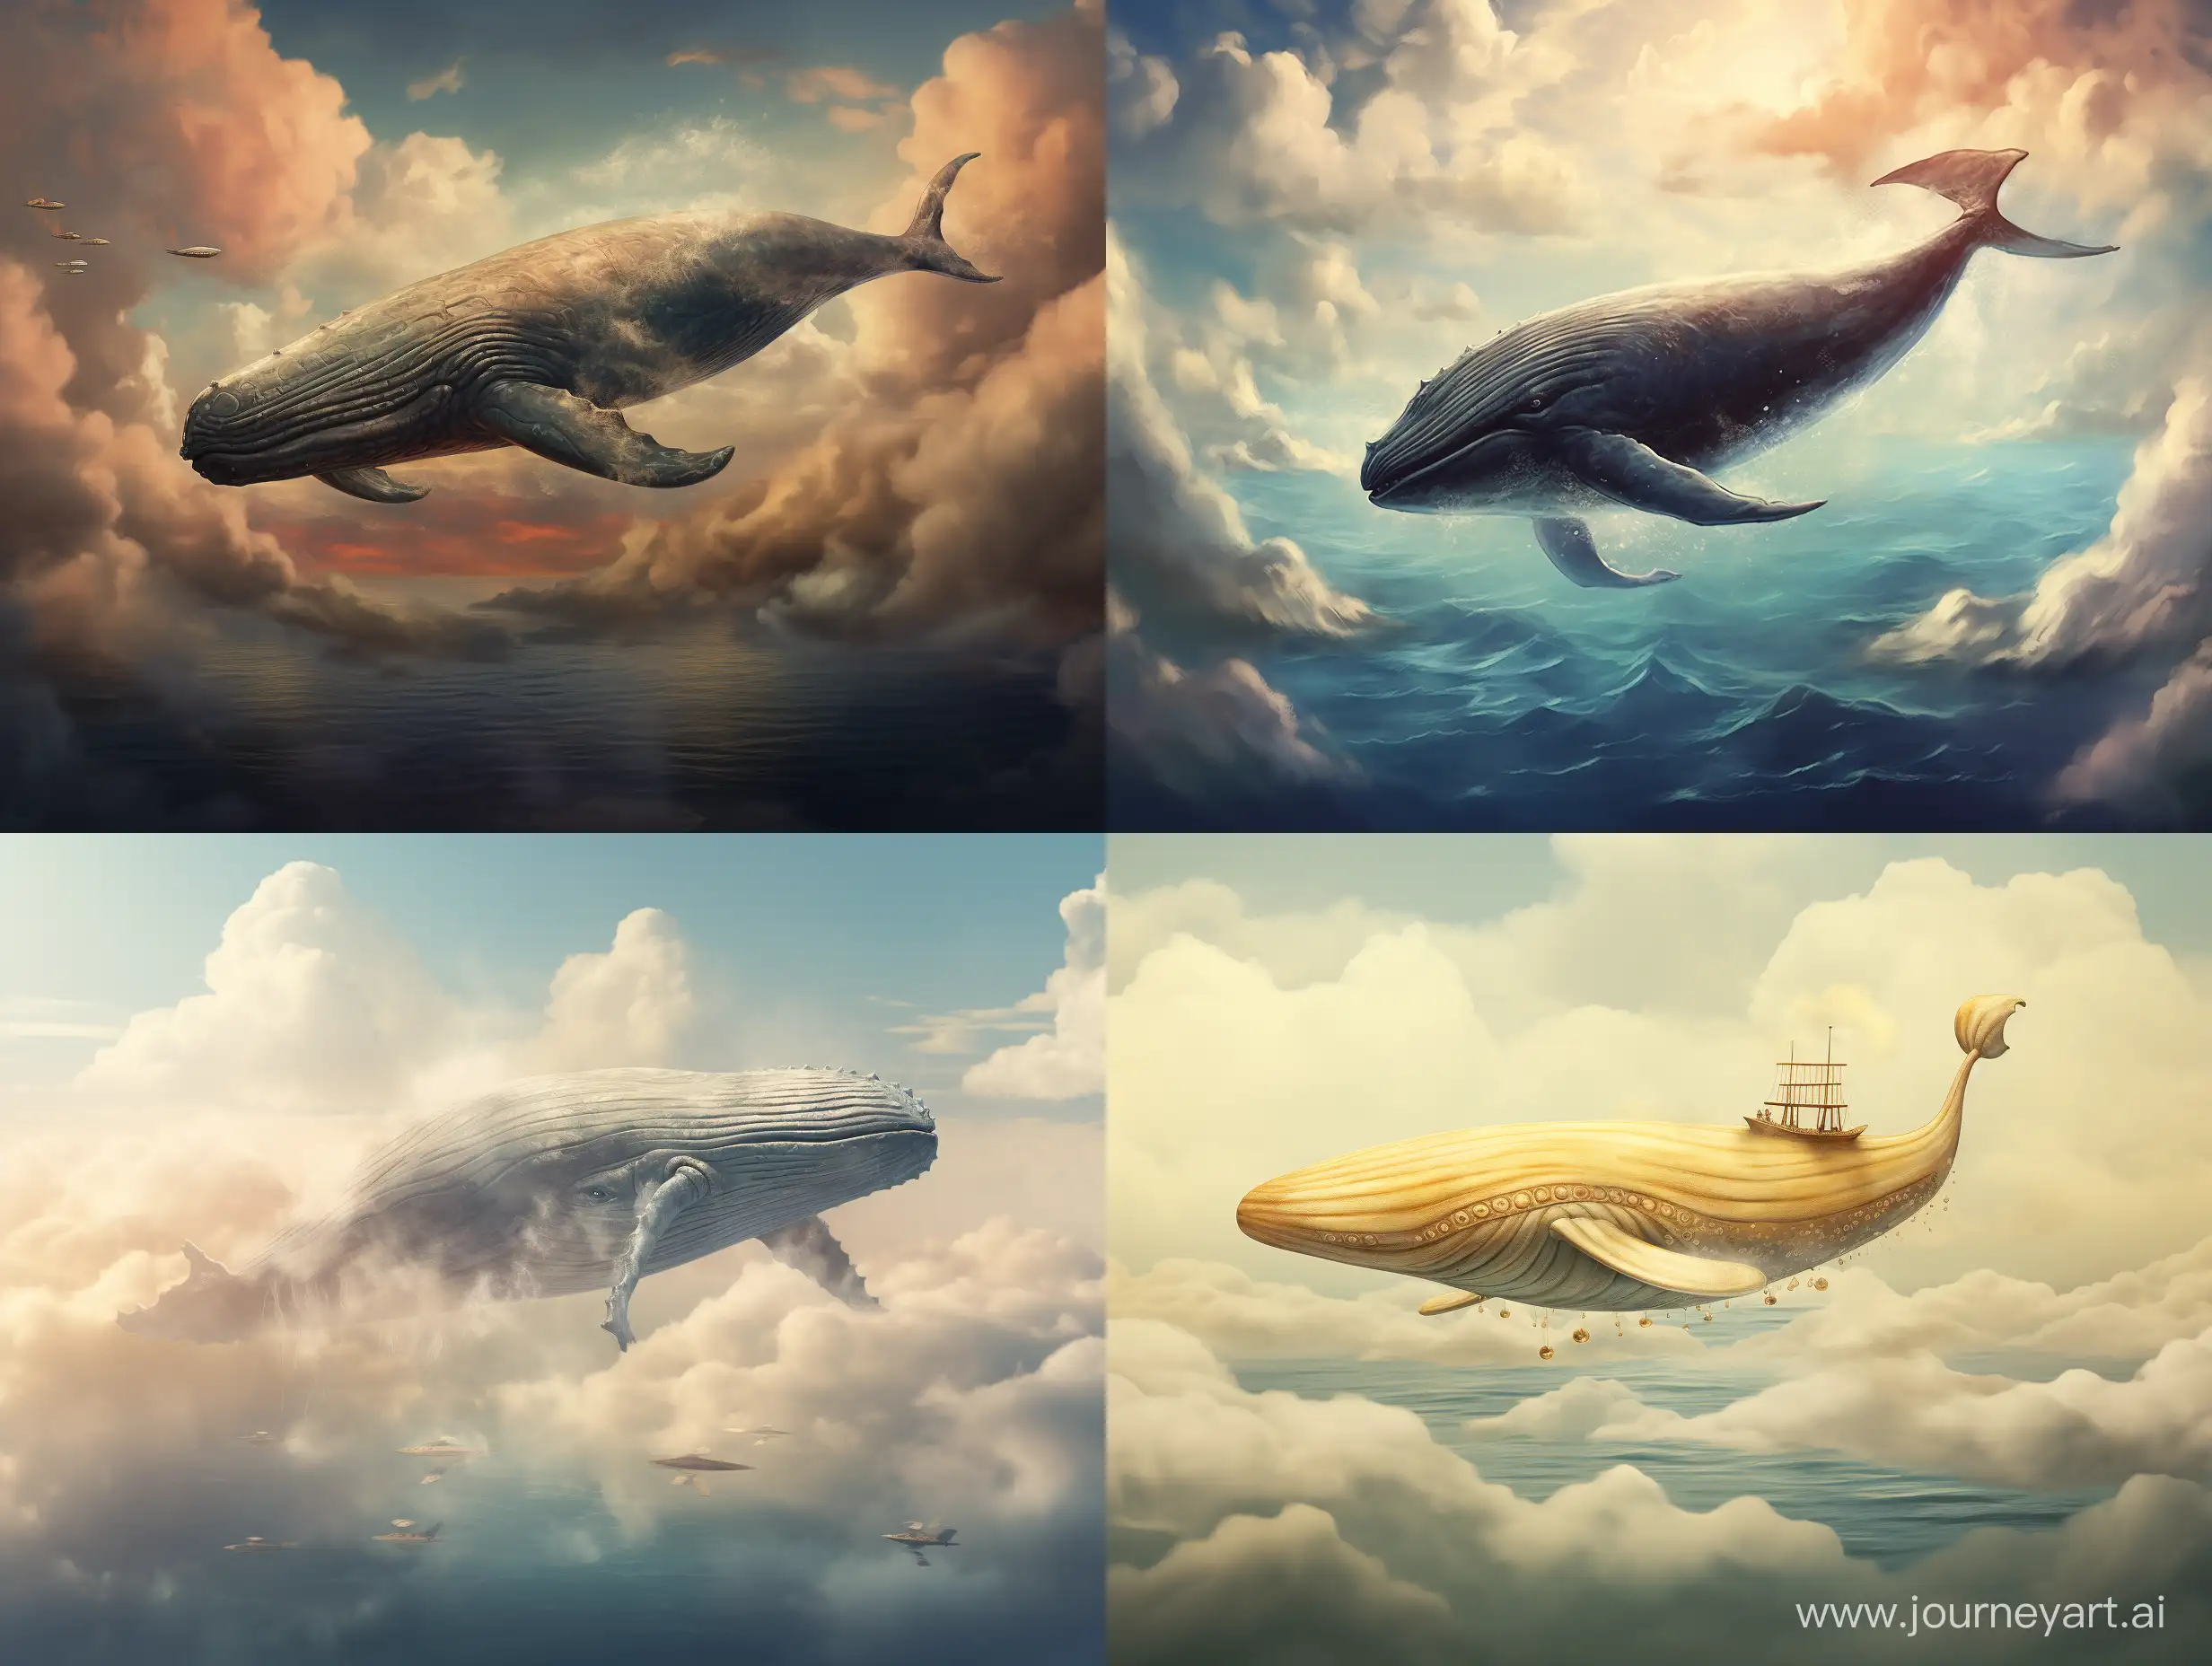 Solitary-Whale-Soaring-Amidst-Clouds-AweInspiring-Vision-of-Freedom